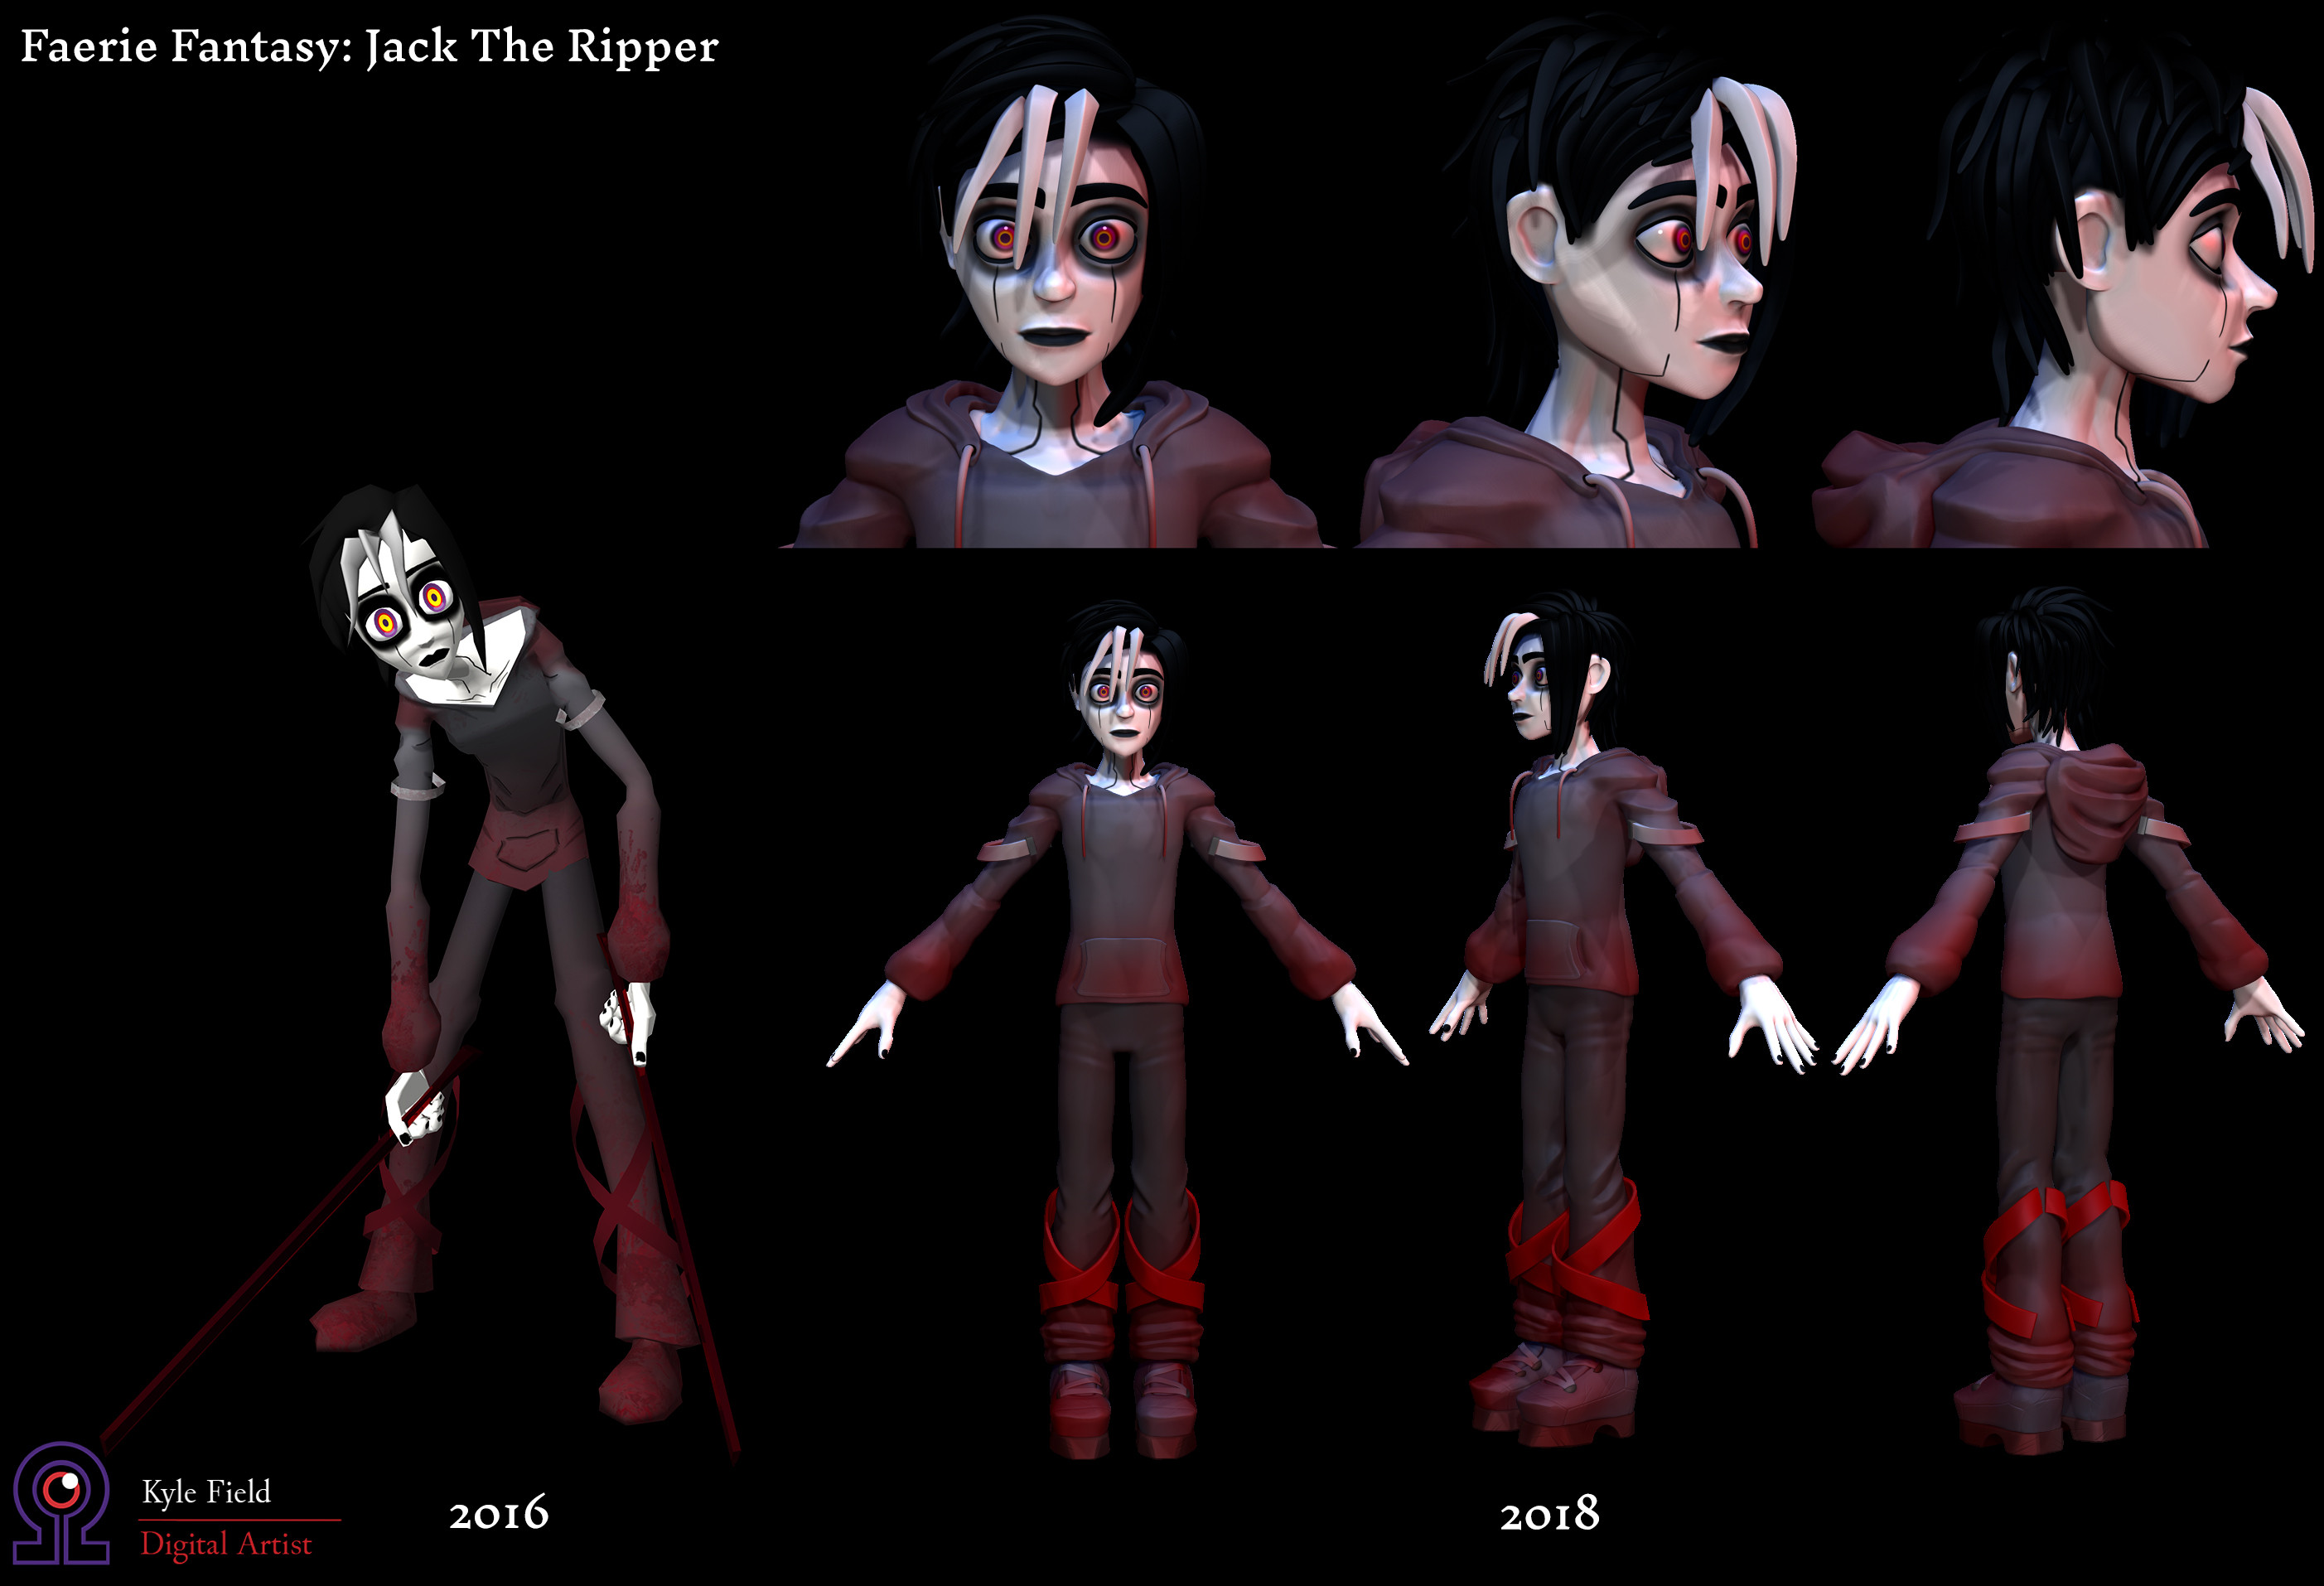 Comparison between original model from 2016 and current ZBrush Sculpt